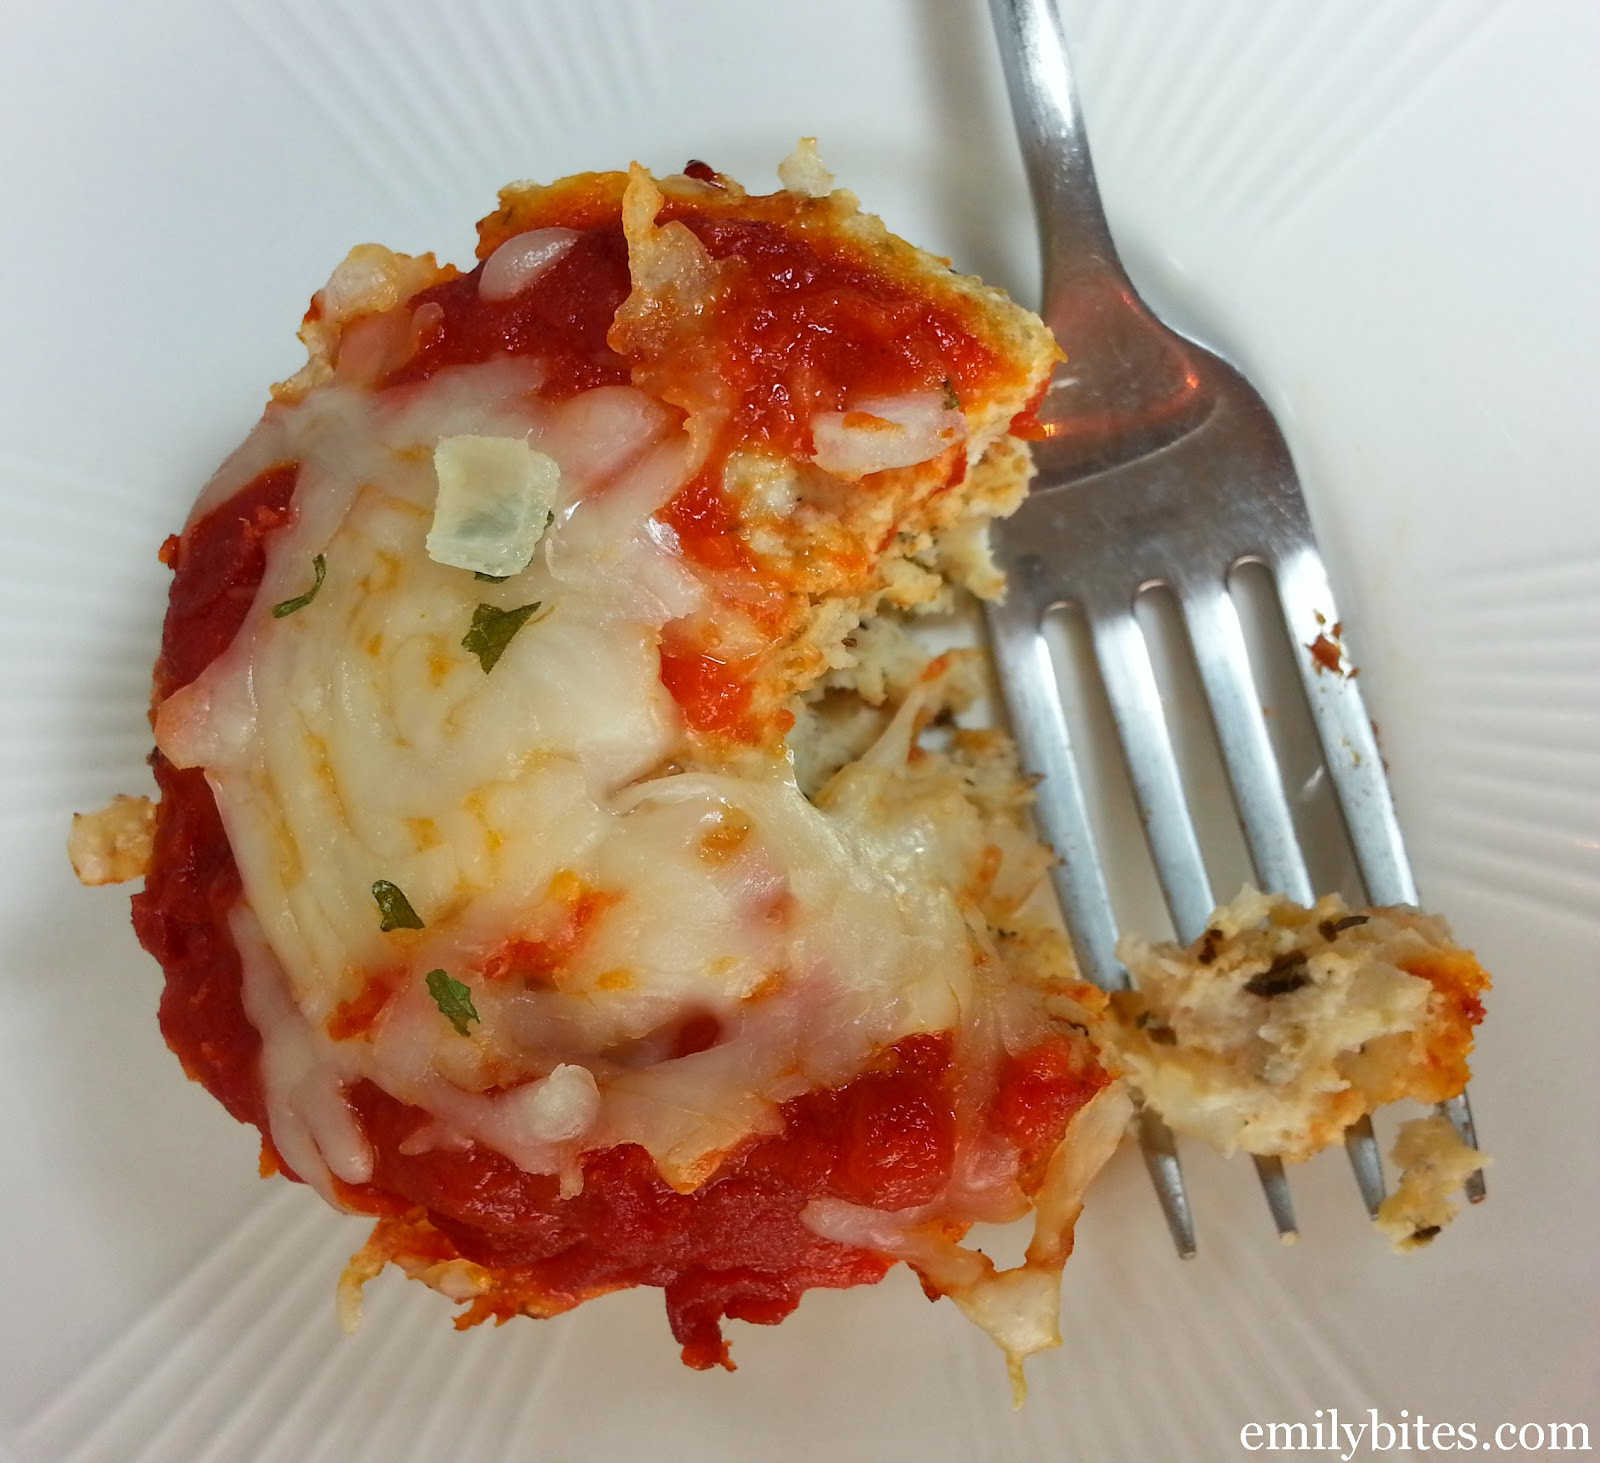 Weight Watchers Meatloaf Muffins
 Chicken Parmesan Meatloaf "Muffins" Emily Bites